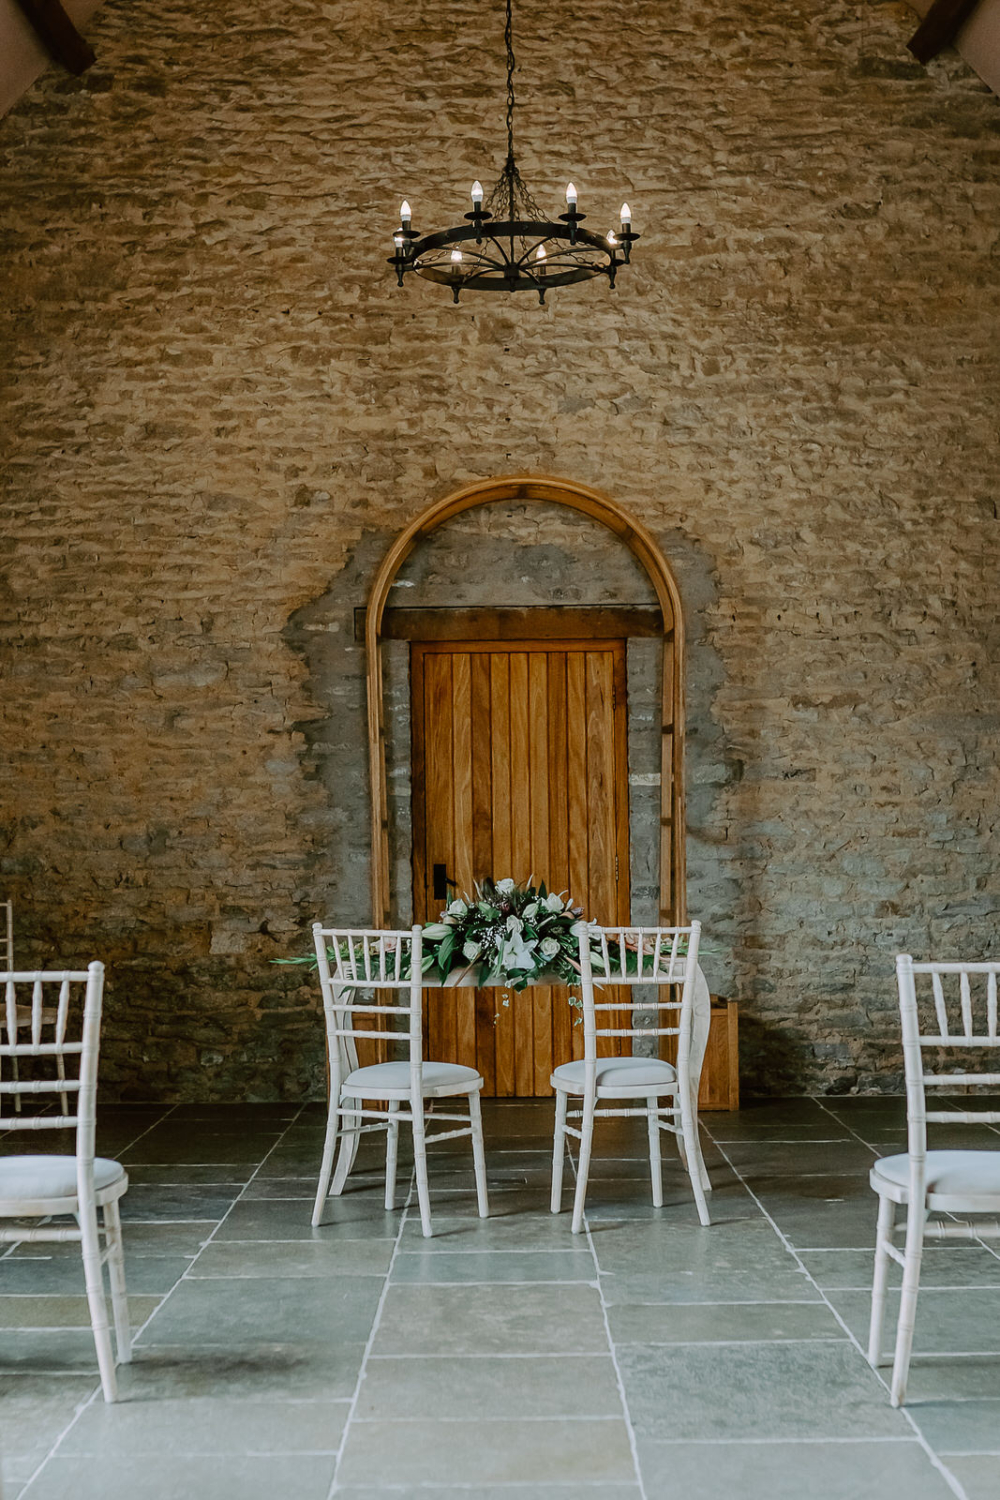 Ceremony room at Stratton court barn ready for the guests arrive